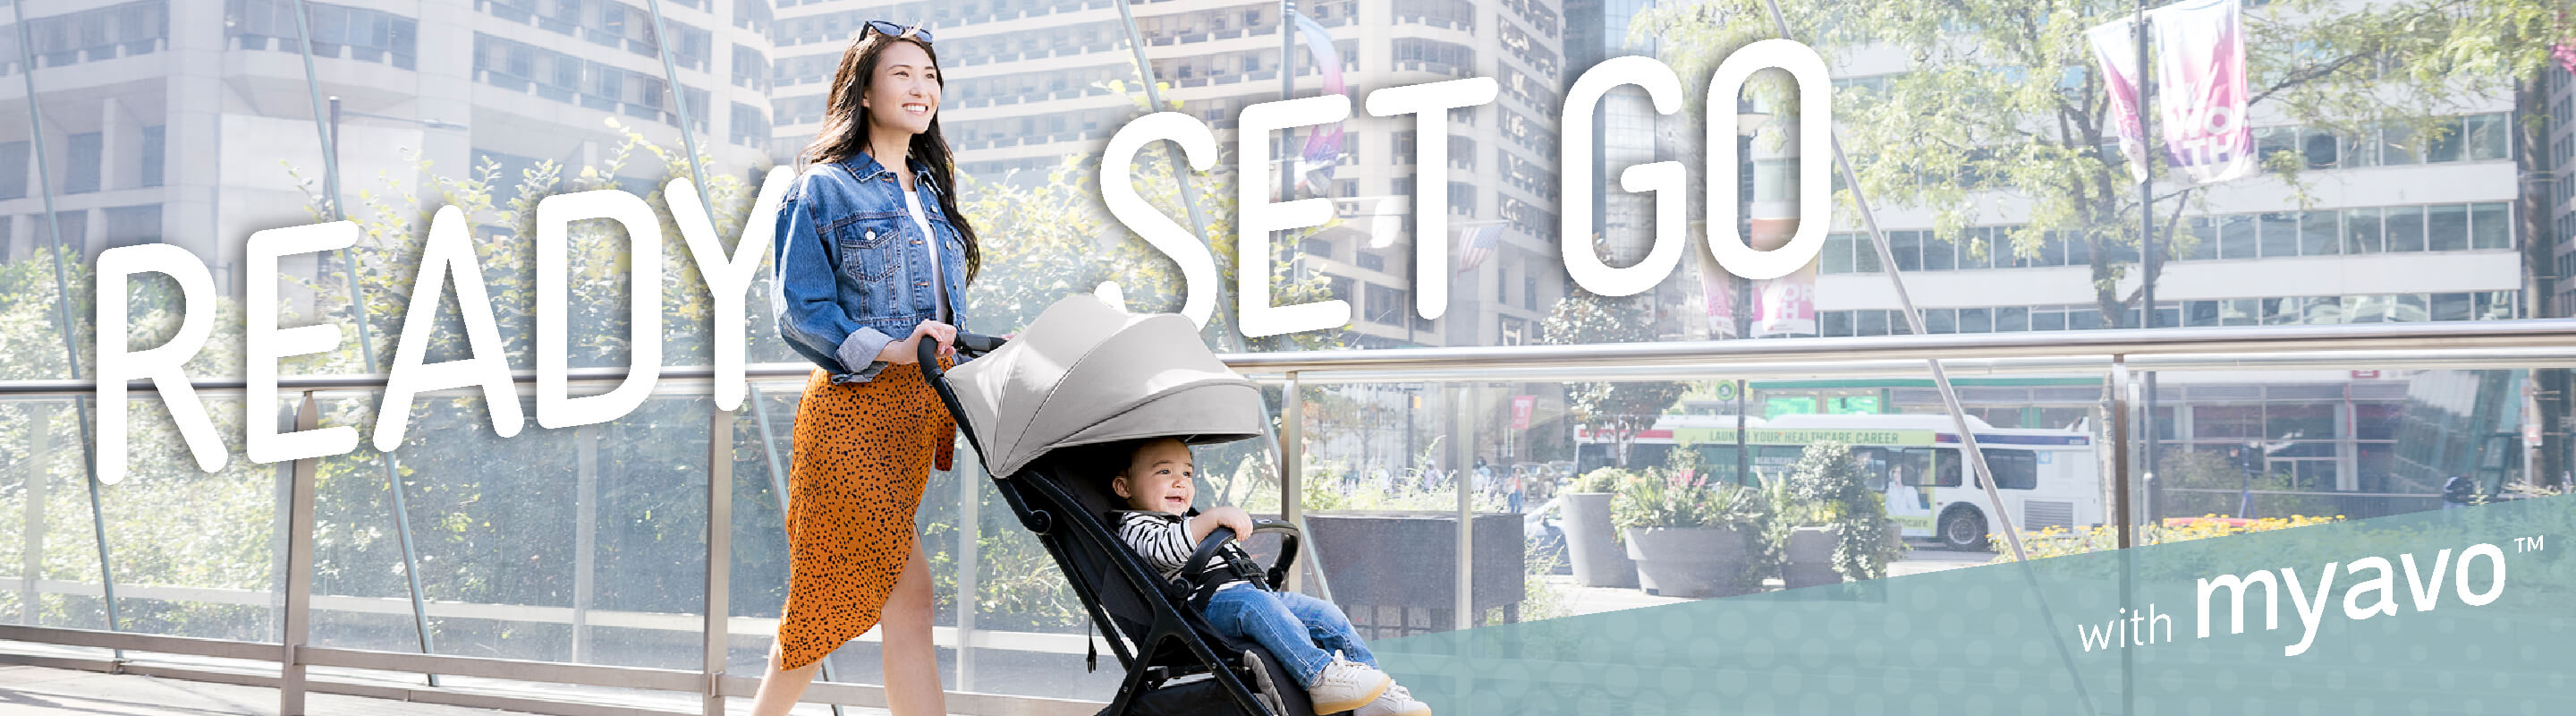 Mum and baby walking through the city in Graco Myavo with Ready, Set, Go text. 